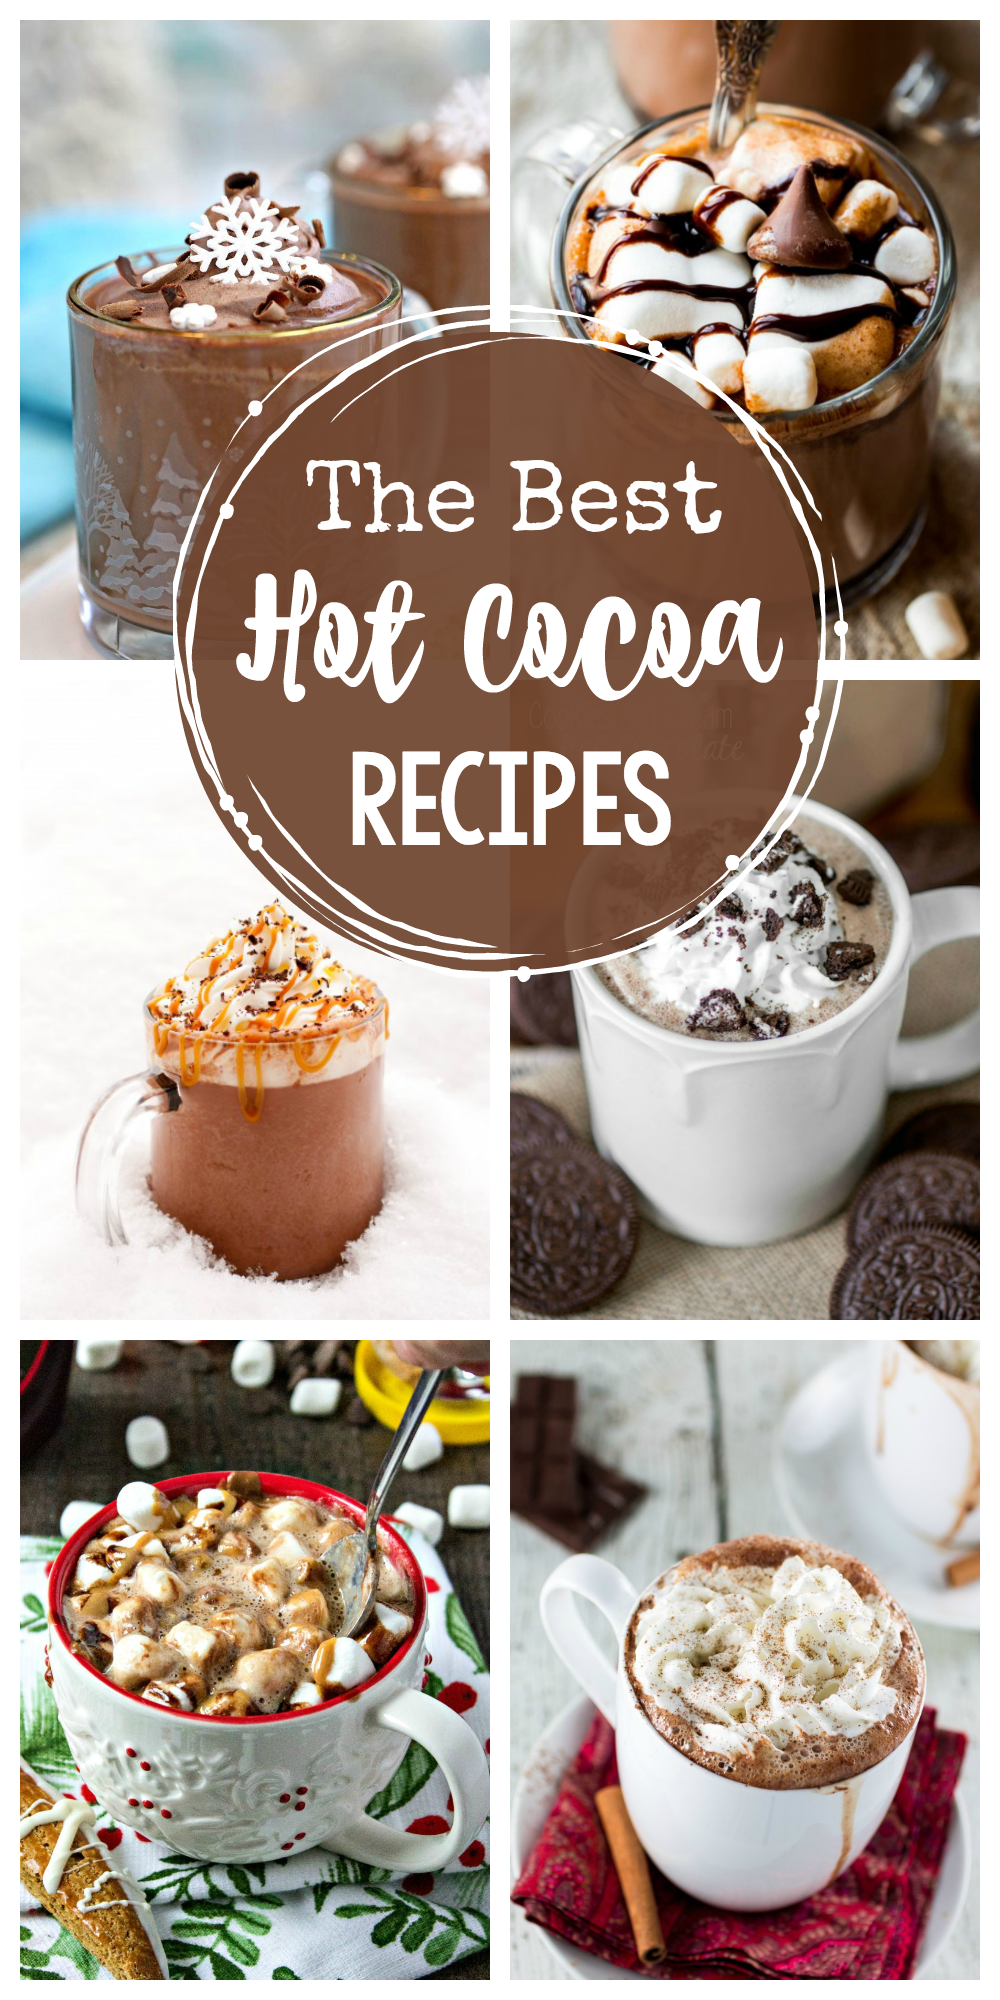 Hot Cocoa Recipes that you're going to love! These hot chocolate ideas are all decadent and amazing! #hotcocoa #hotcocoabar #dessertrecipes #dessertideas